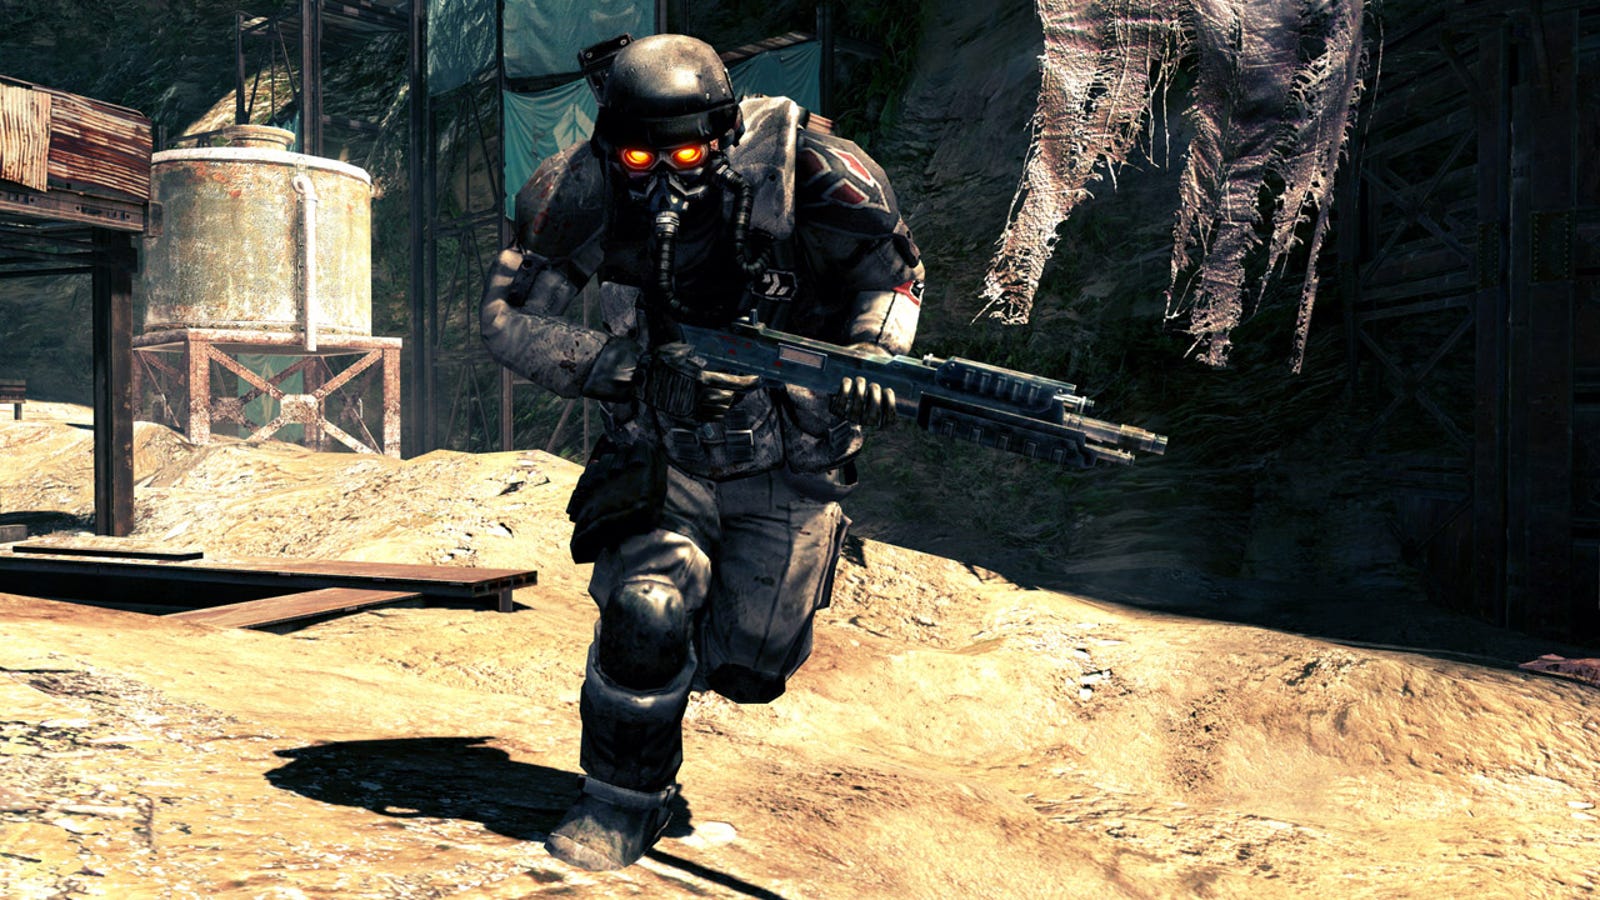 lost-planet-2-invaded-by-the-helghast